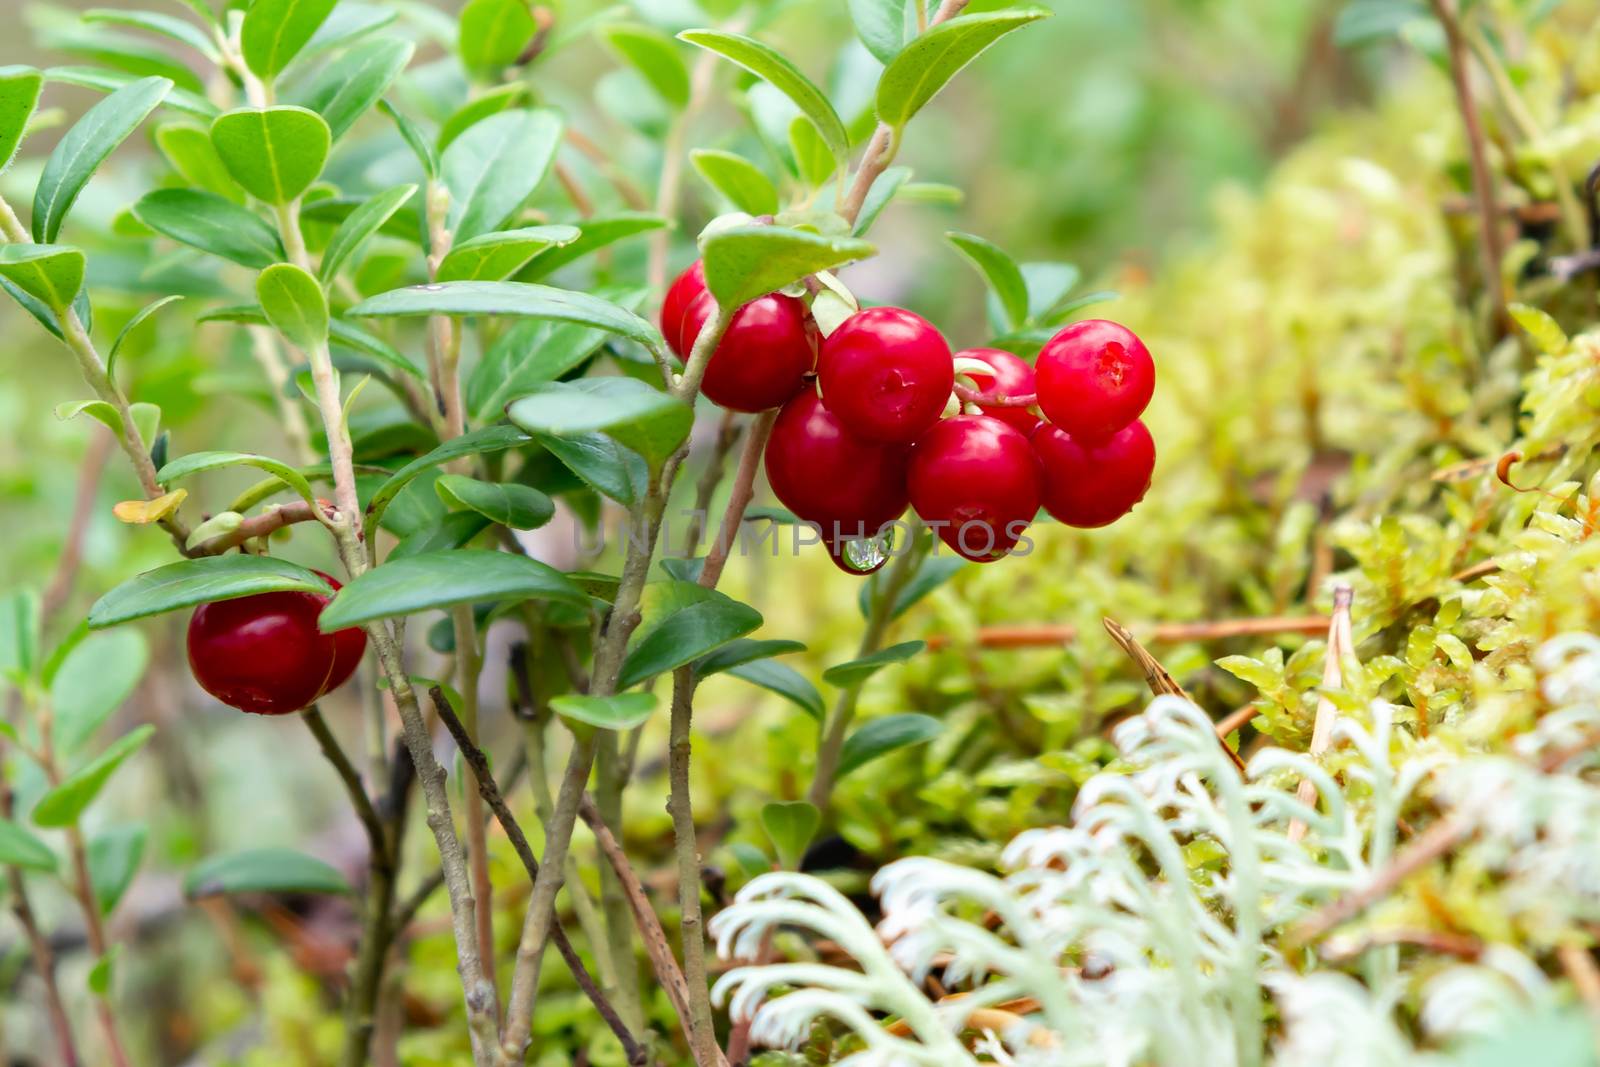 Bunch of lingonberries on a branch in the forest surrounded by white and green moss.